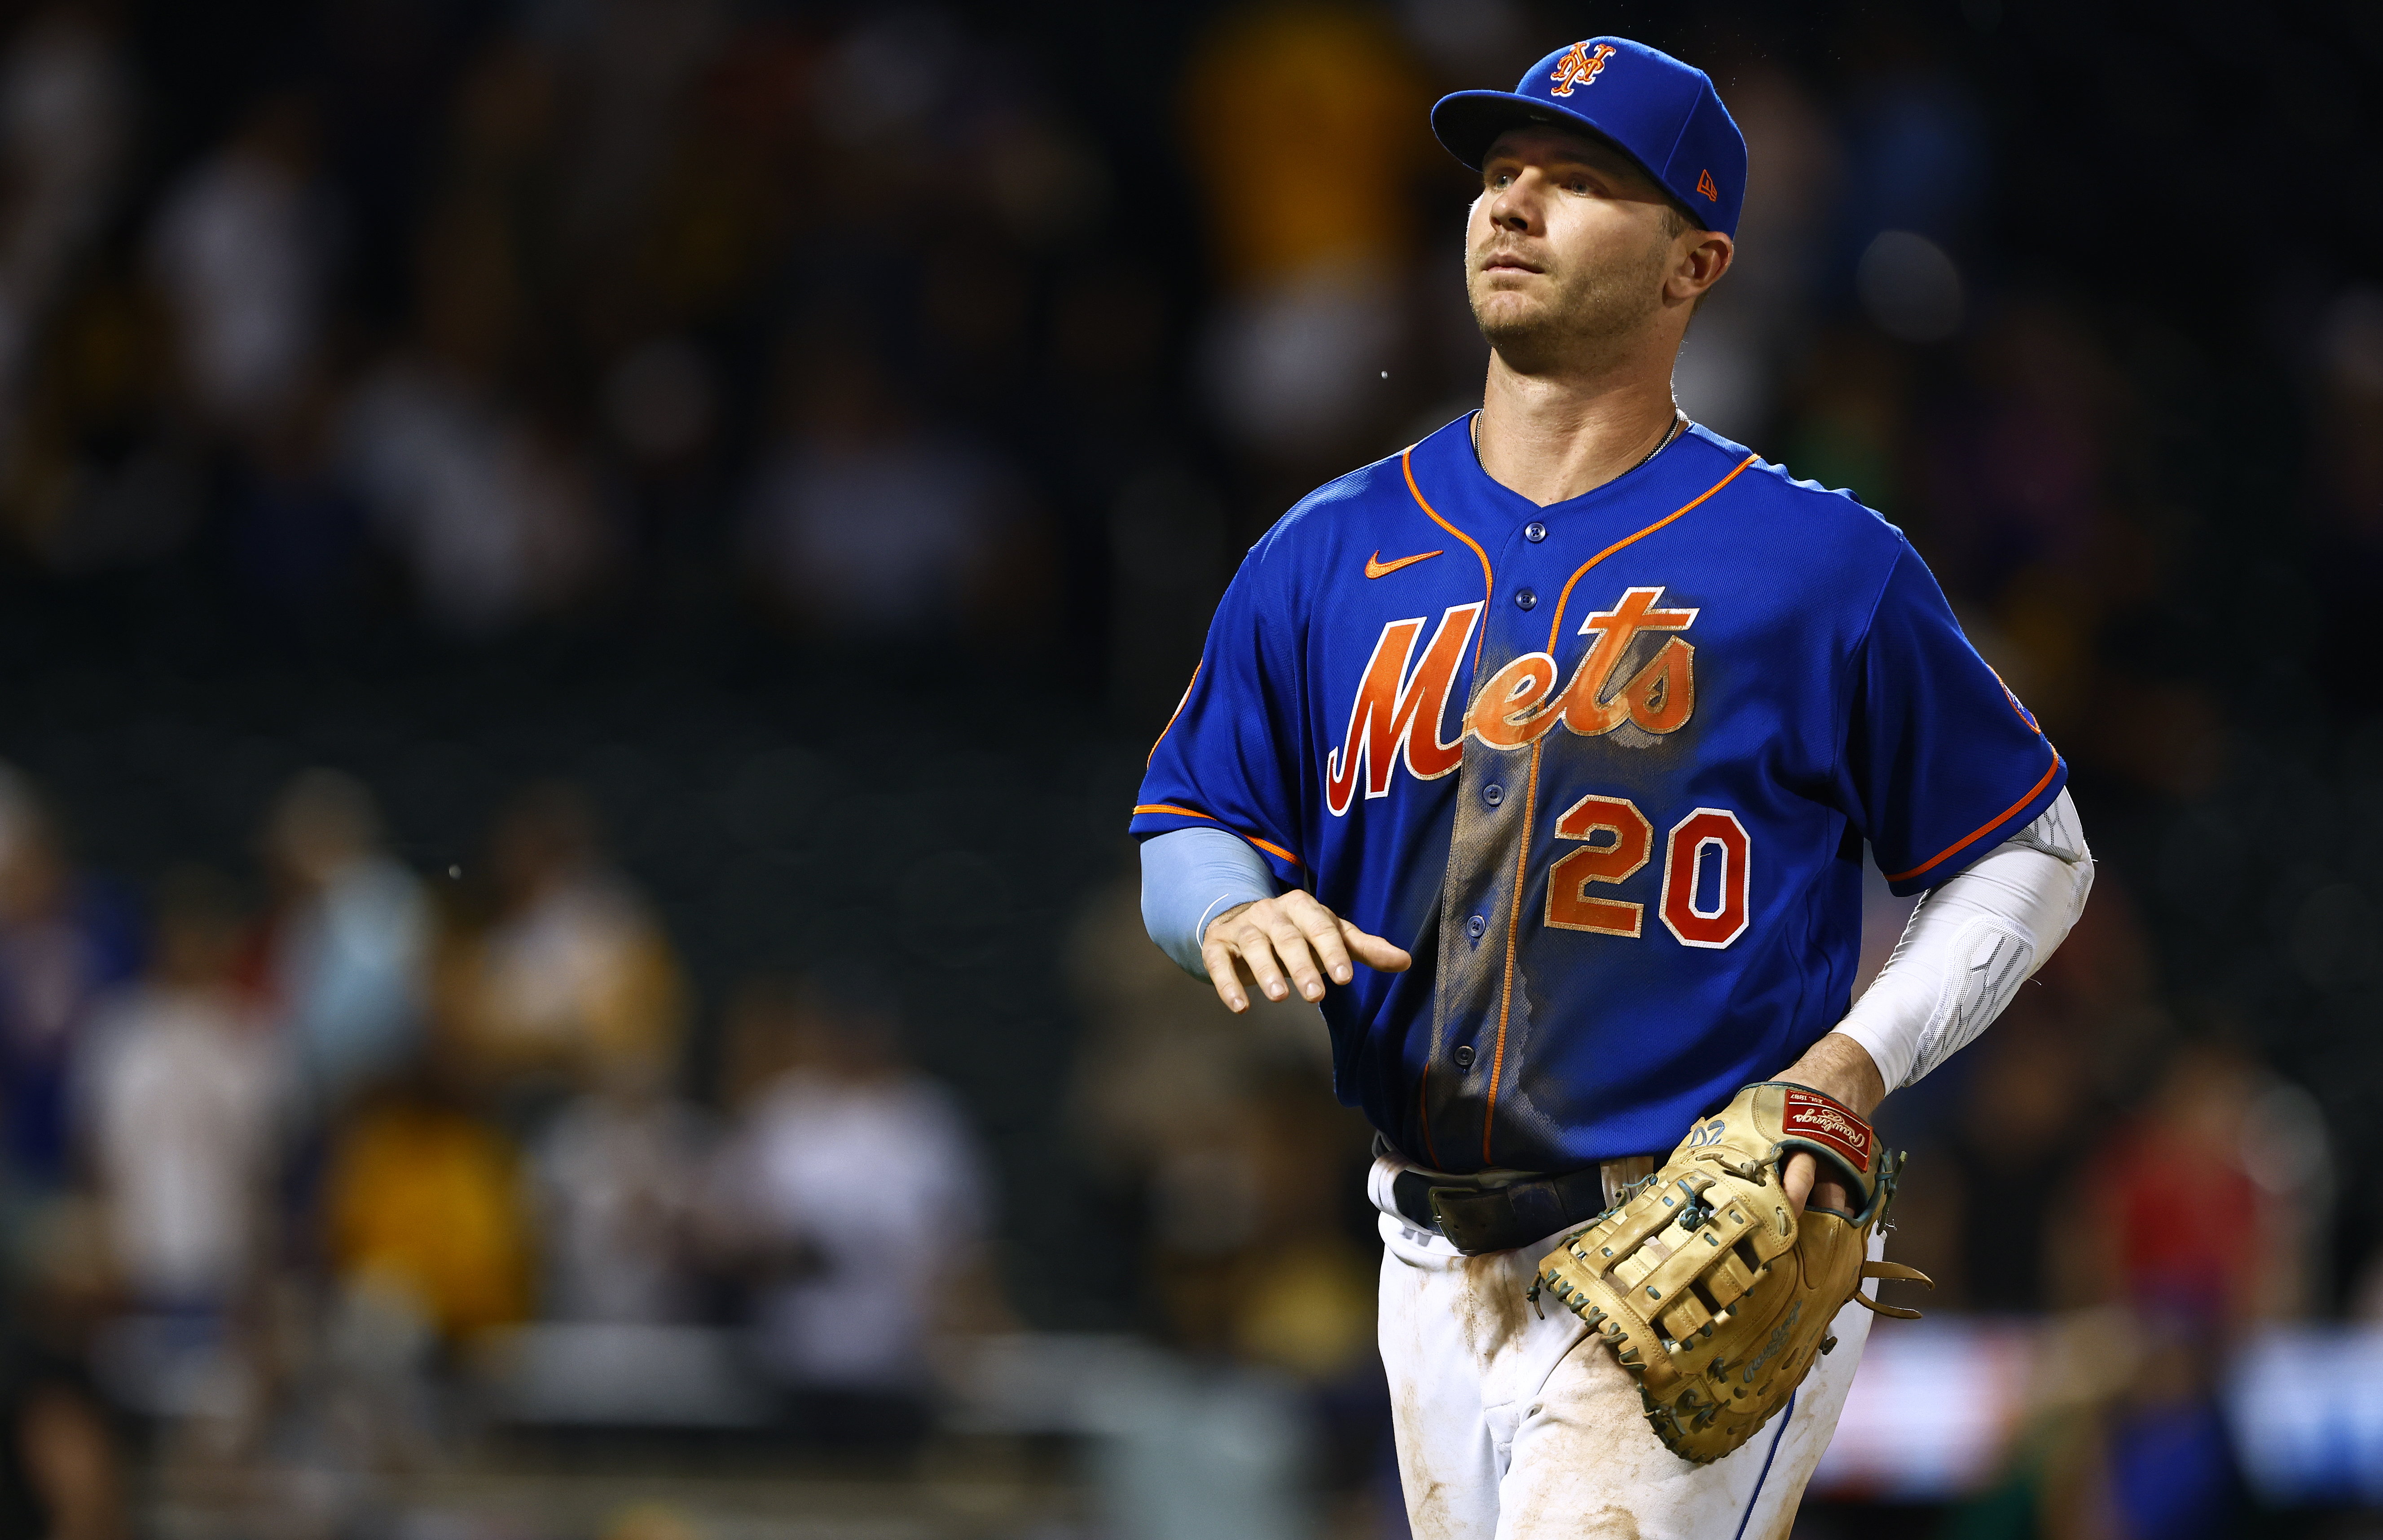 New York Mets 1B Pete Alonso is the happiest man in MLB - Sports Illustrated